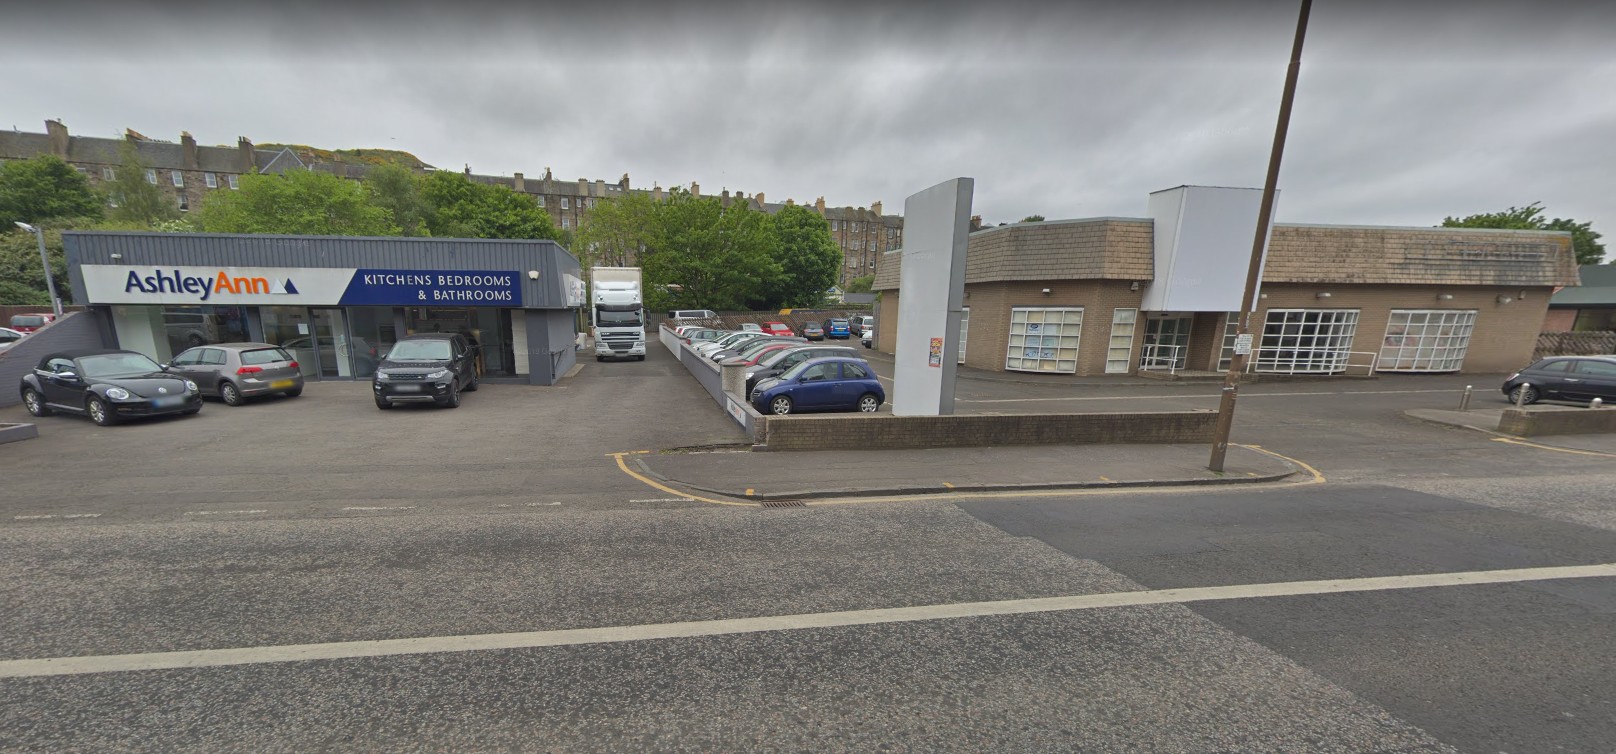 Developer eyes student or residential consent following double deal success in Edinburgh